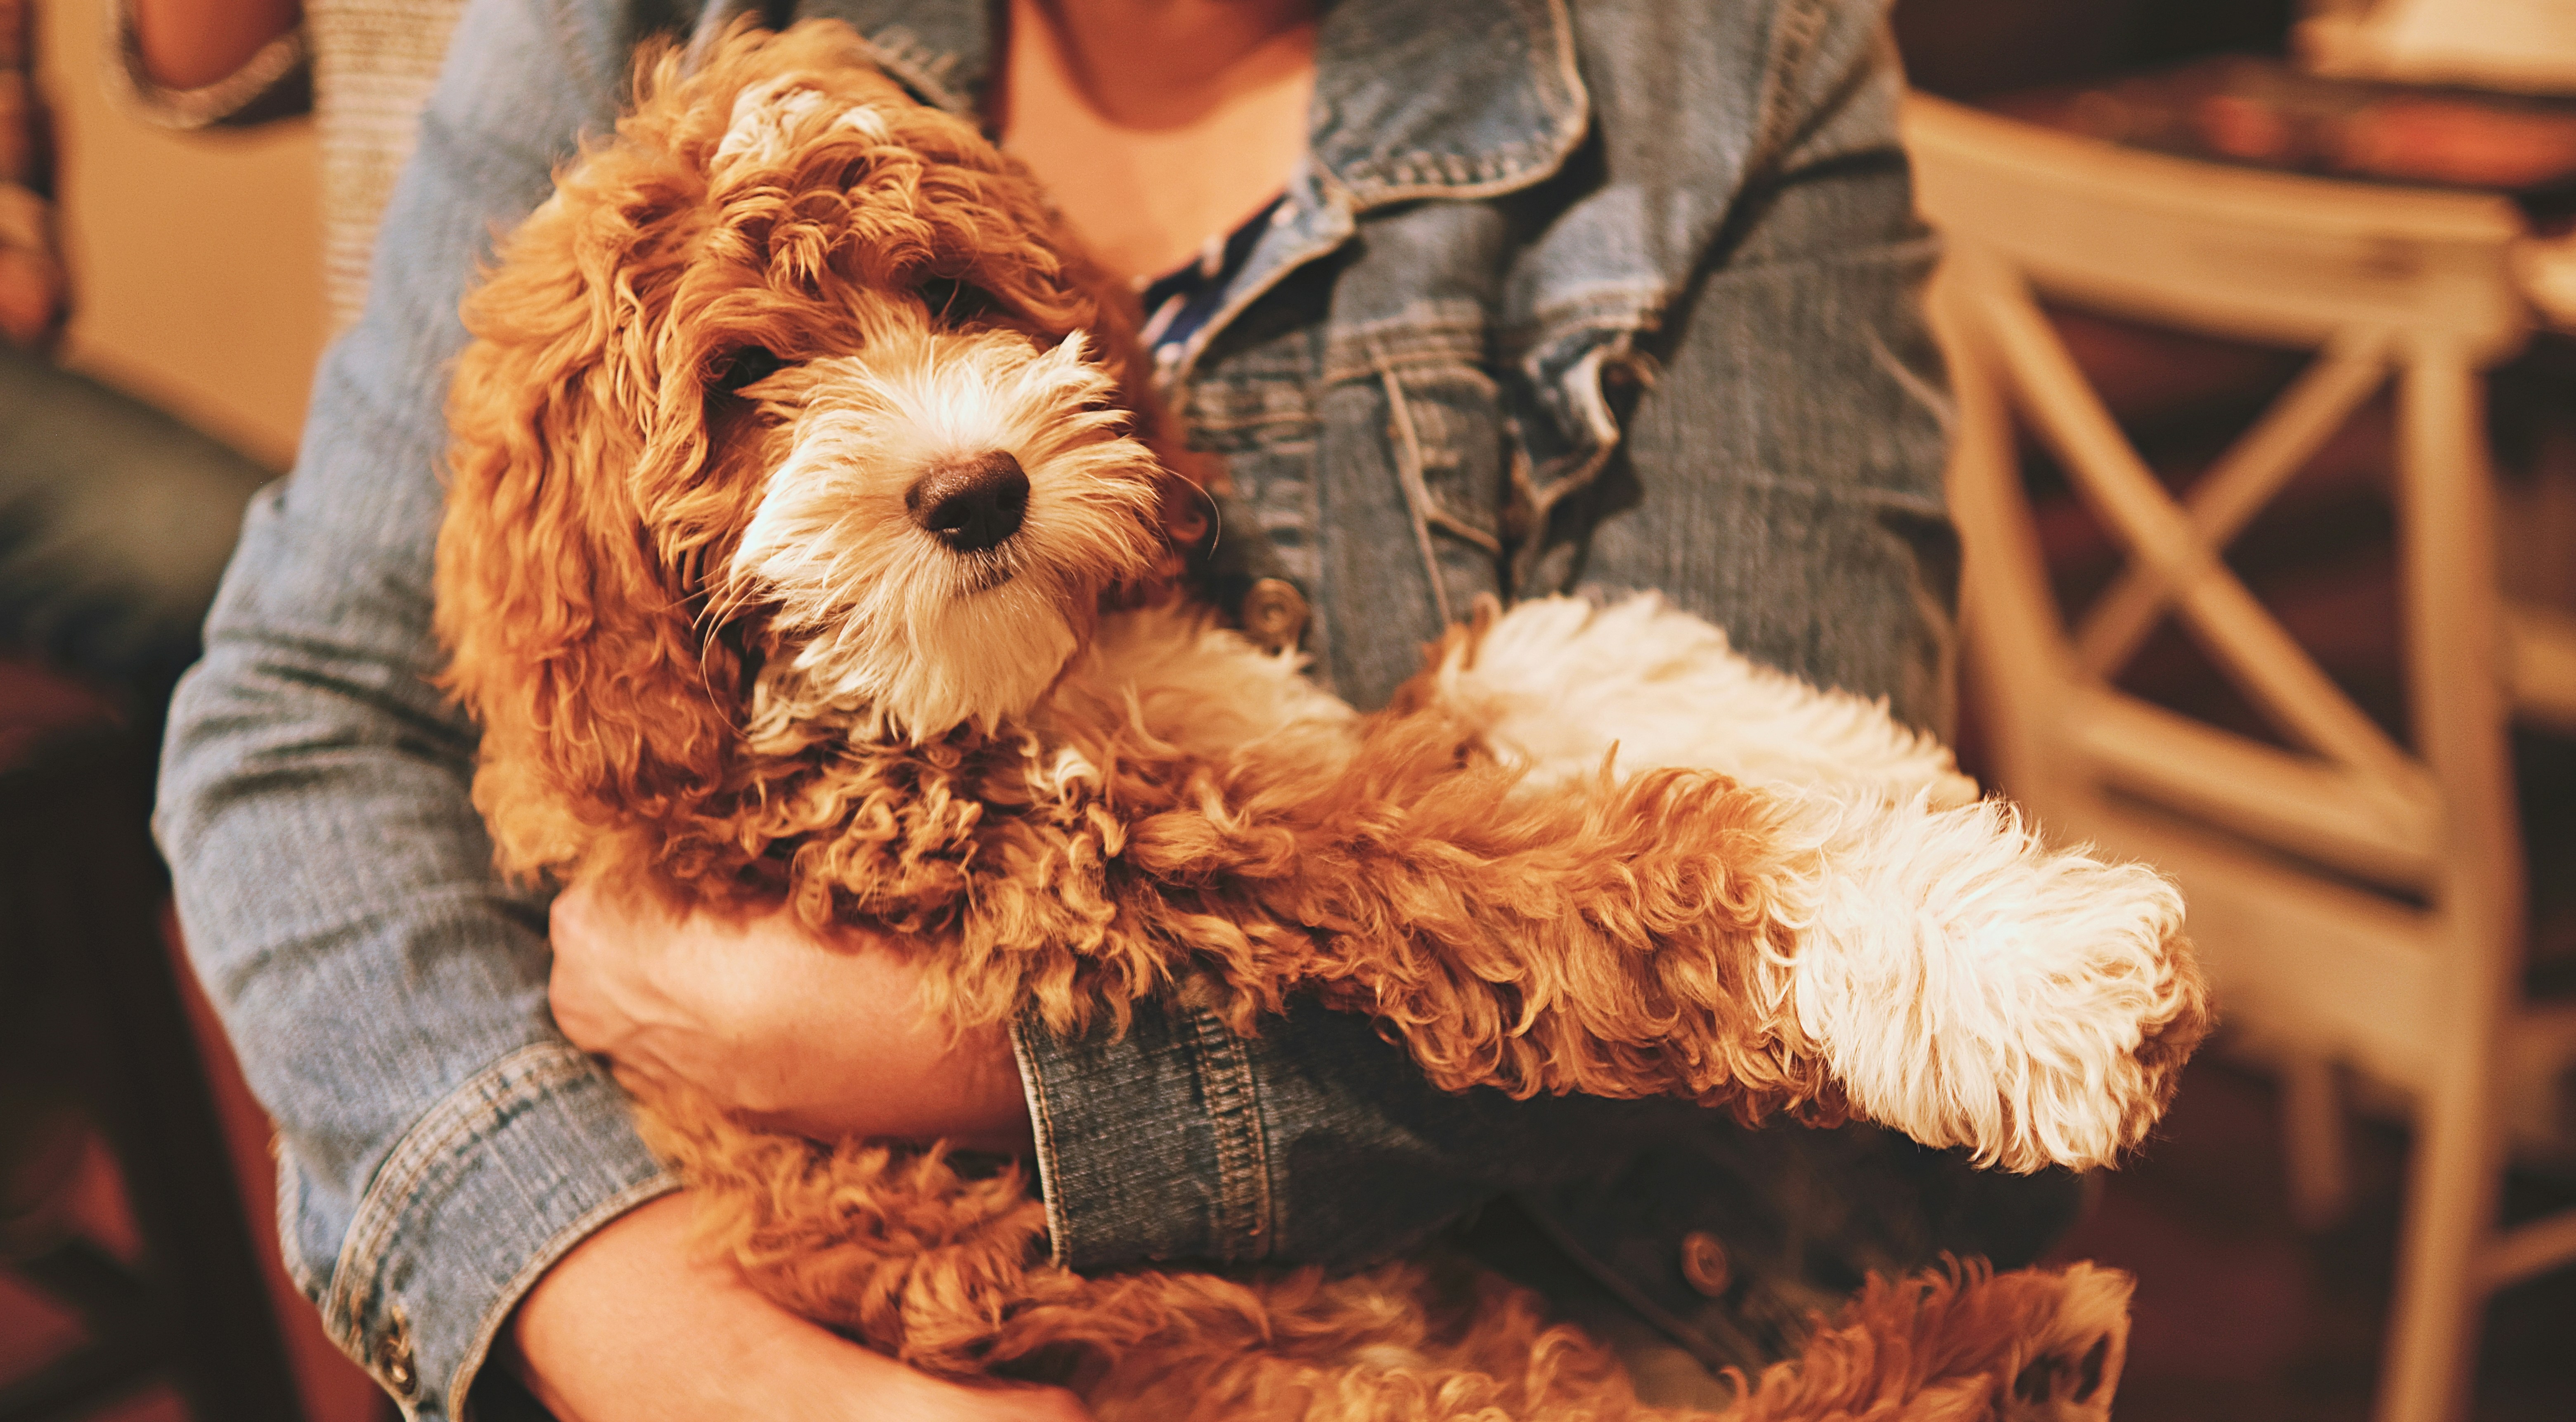 A brown and white goldendoodle being held in person's arms.